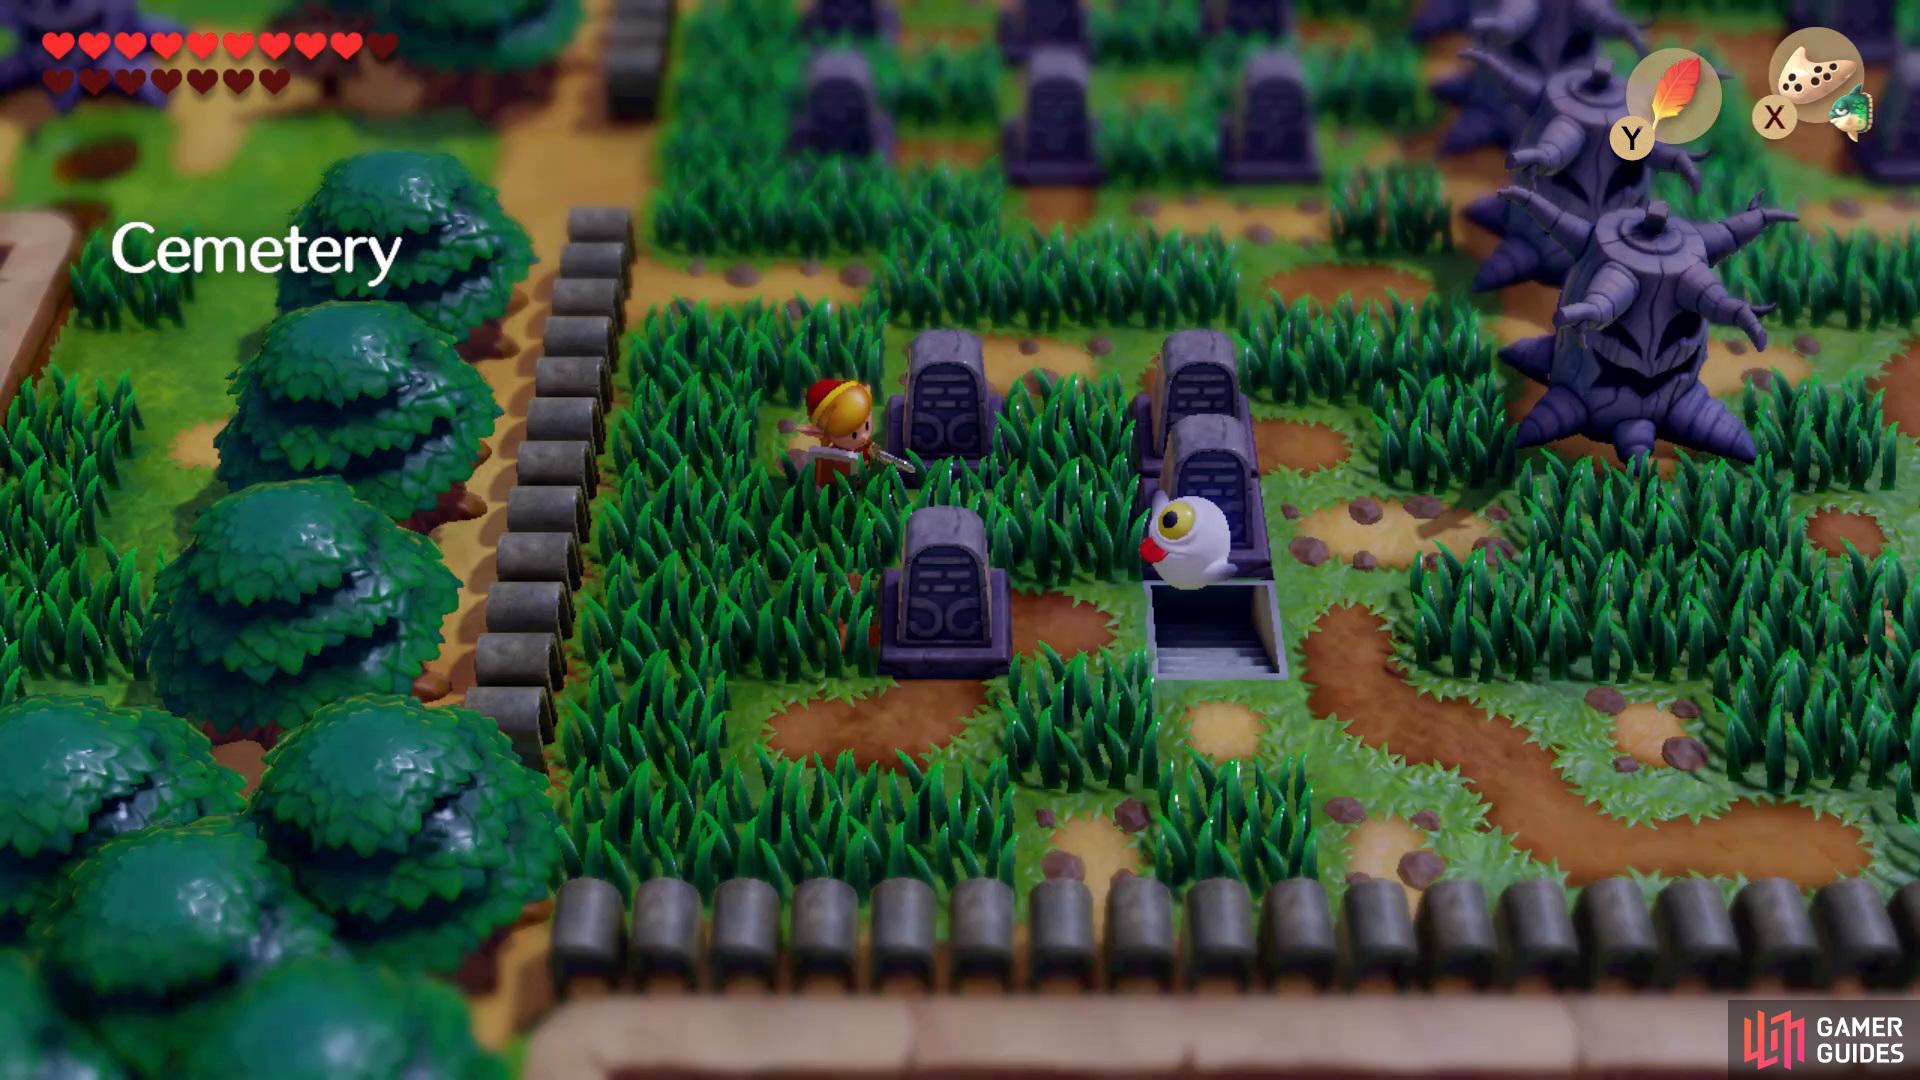 These ghosts will appear when you're in the Cemetery, simply just swipe them with your Sword.